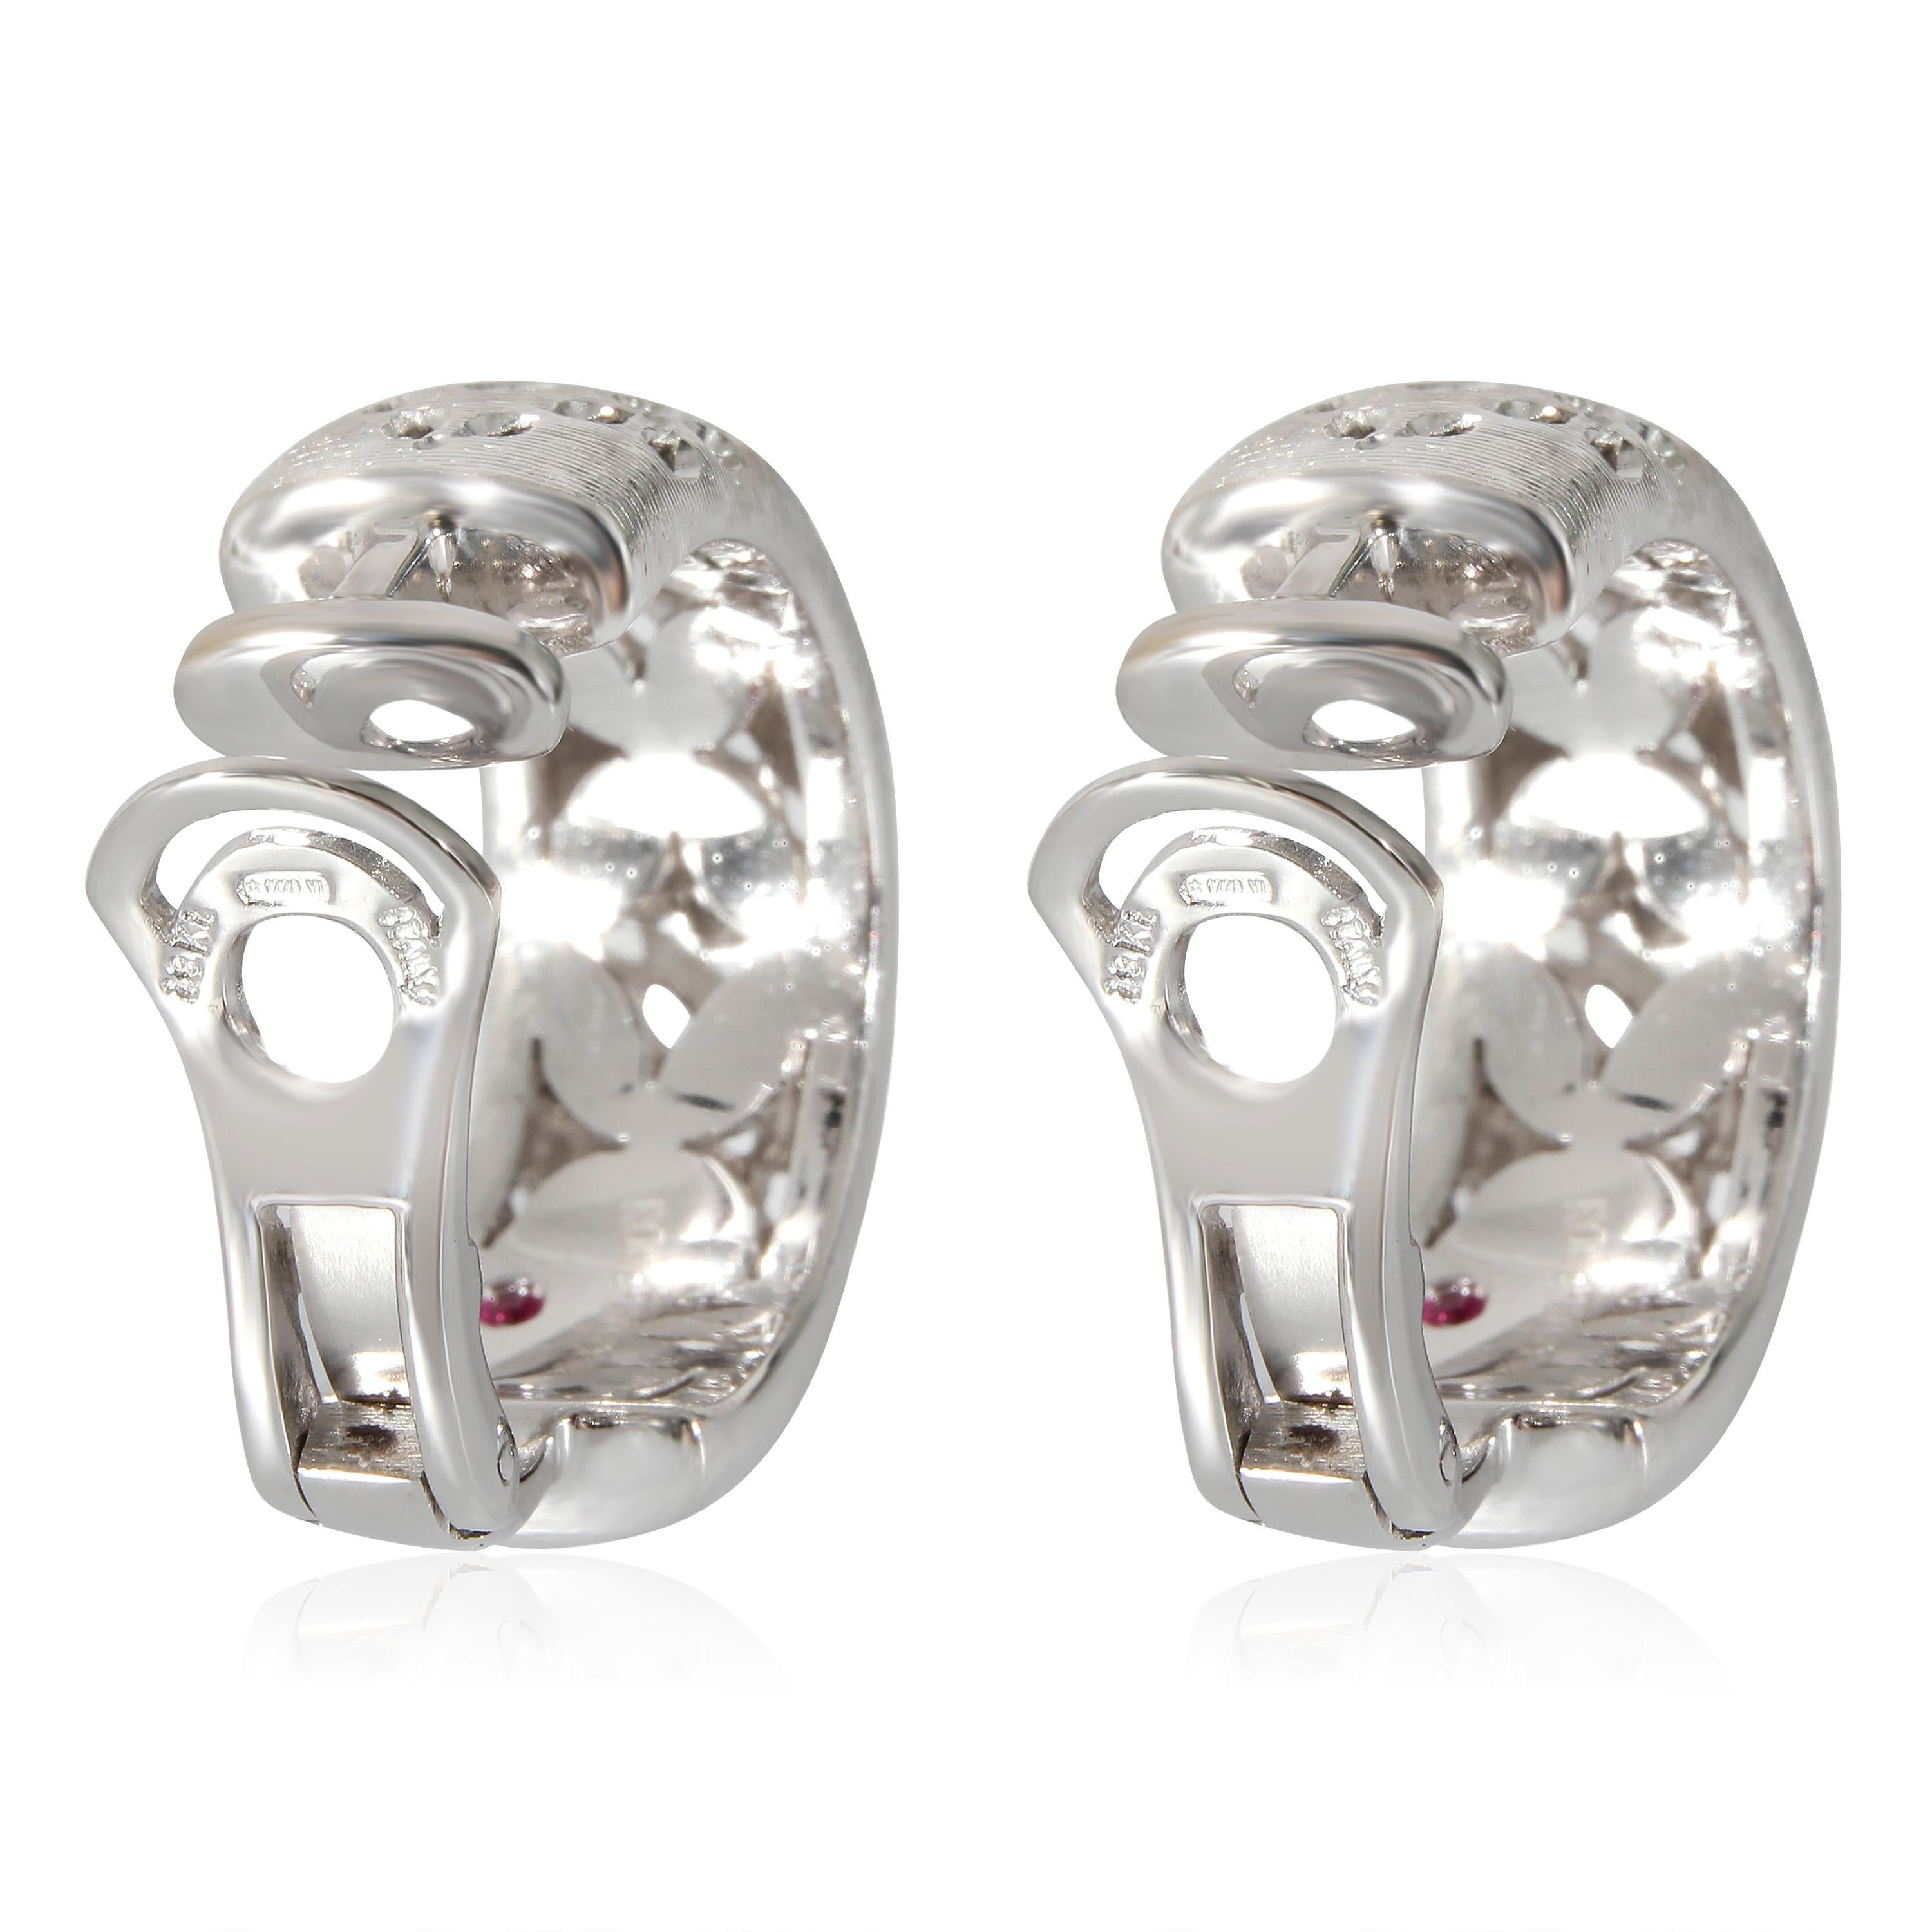 Roberto Coin Granada Clip On Hoop Earrings in 18k White Gold 0.40 CTW

PRIMARY DETAILS
SKU: 132701
Listing Title: Roberto Coin Granada Clip On Hoop Earrings in 18k White Gold 0.40 CTW
Condition Description: Retails for 4900 USD. In excellent